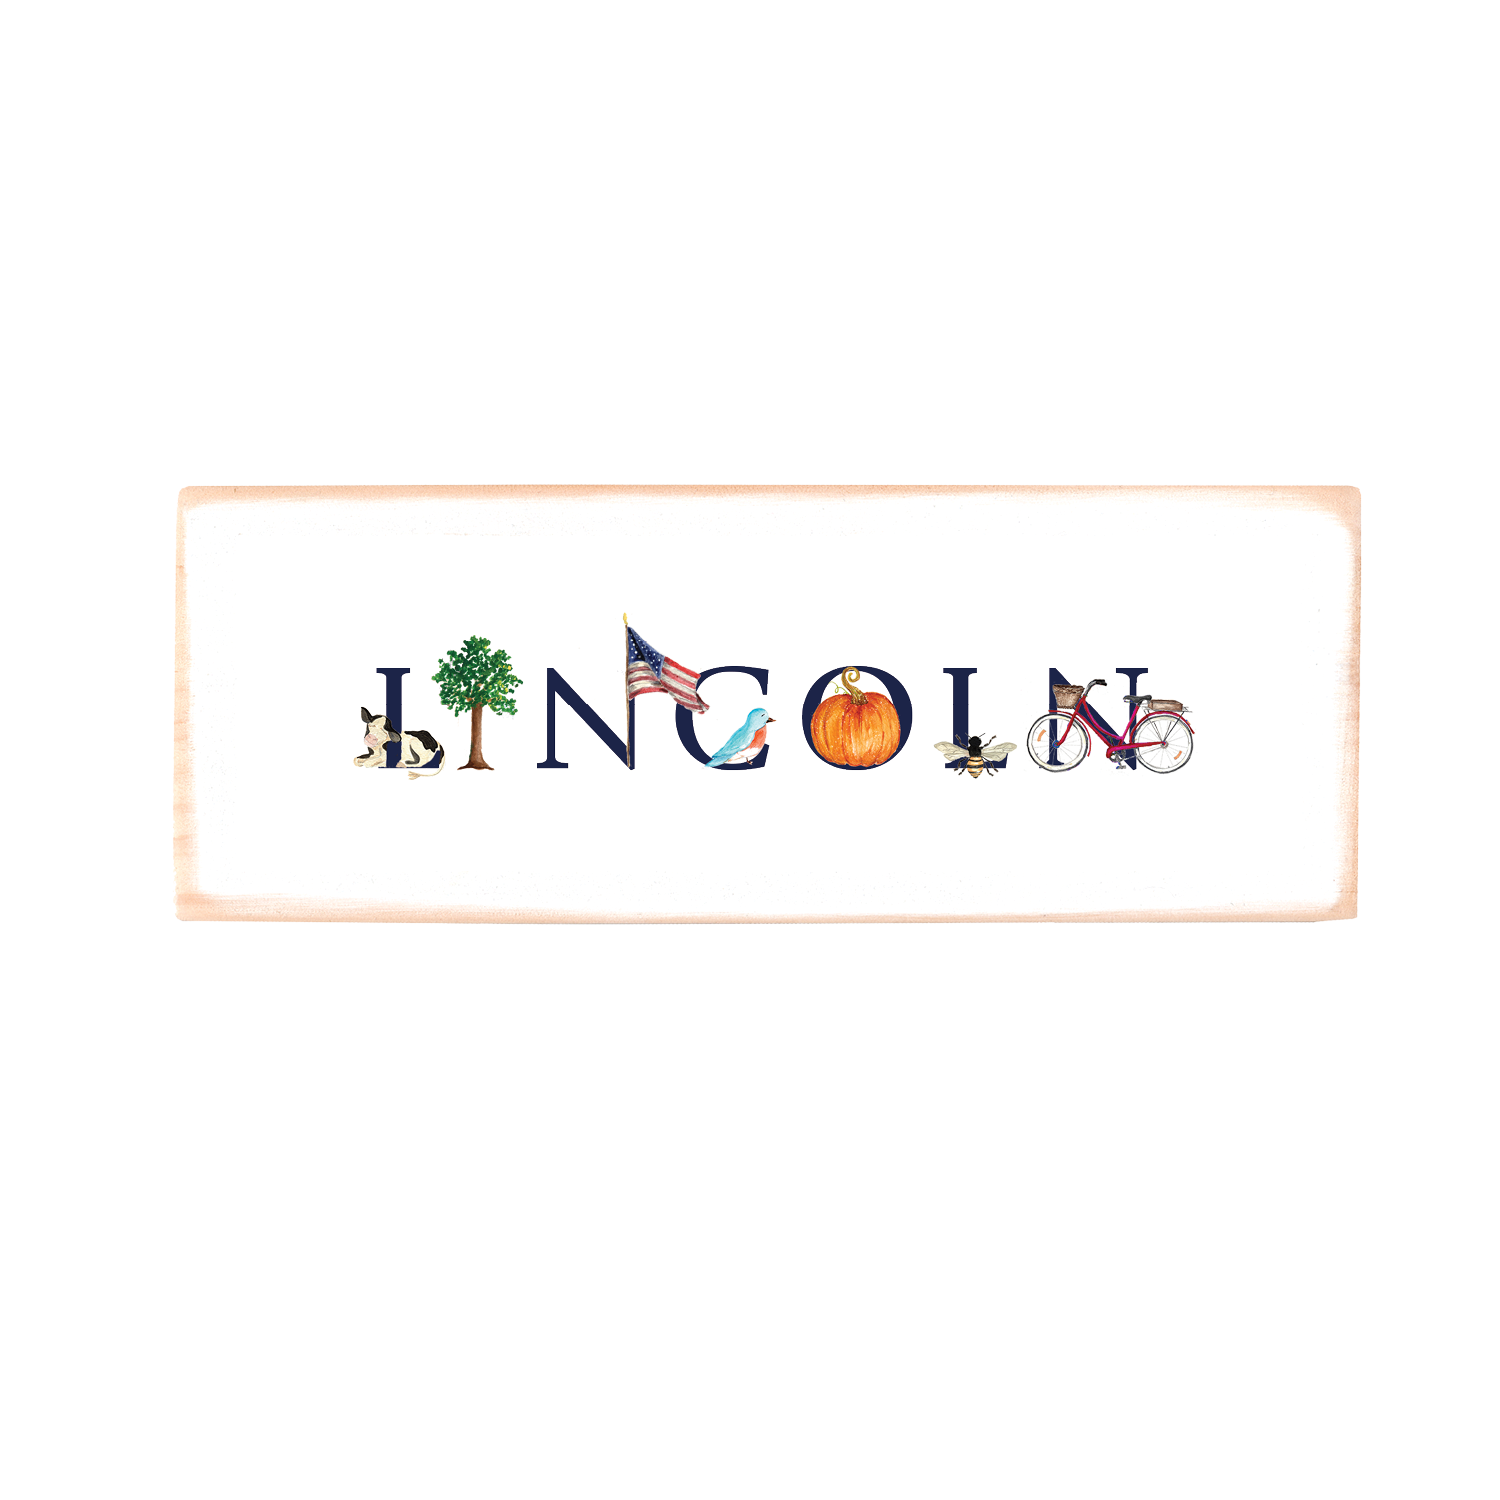 Lincoln rectangle wood block